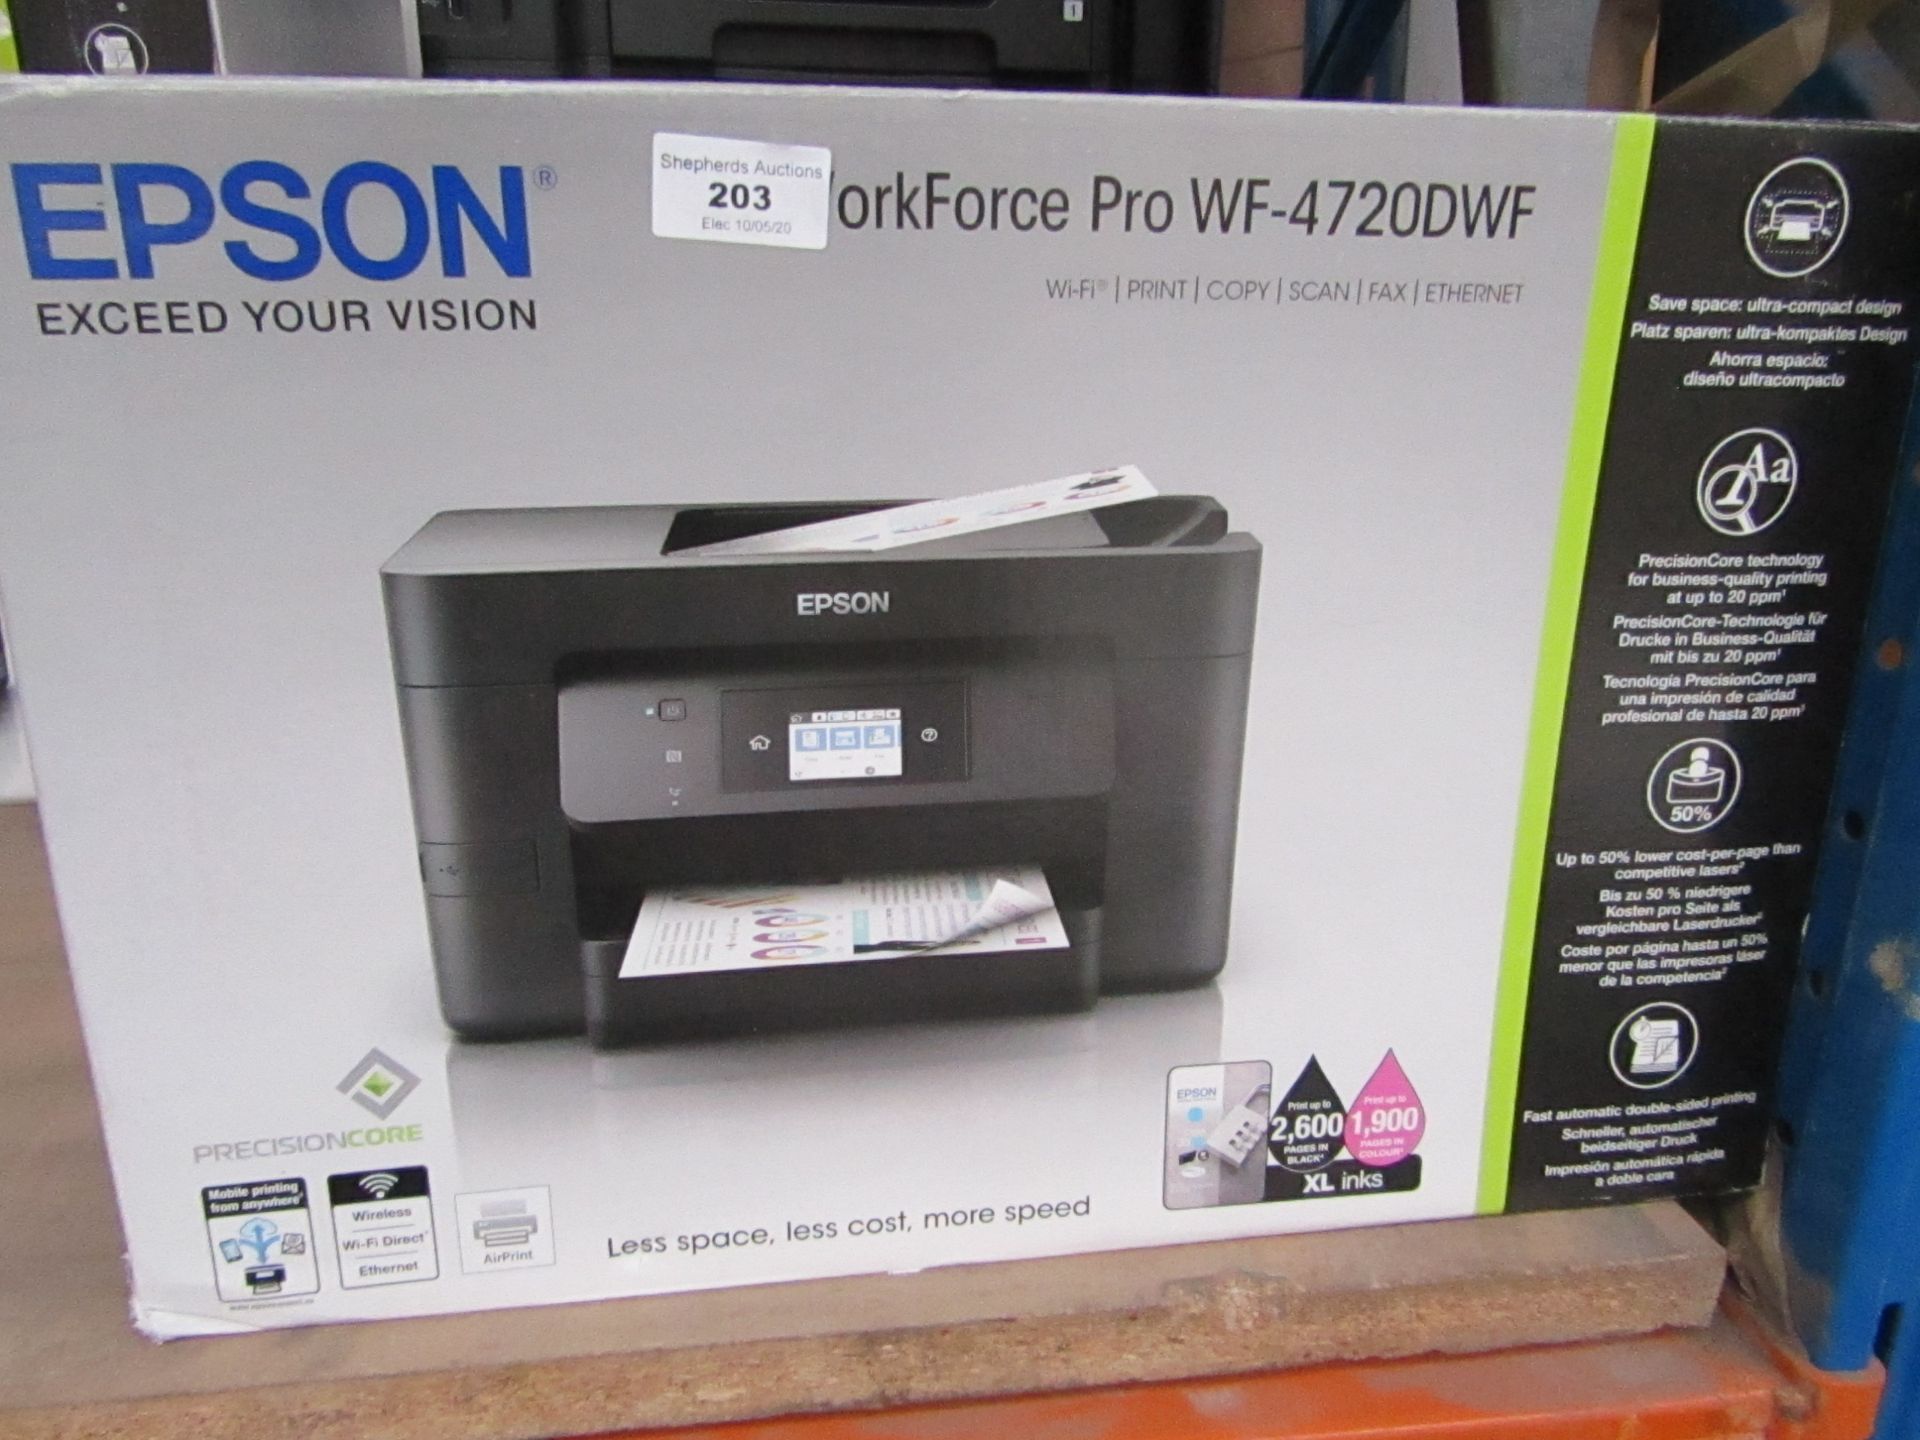 Epson workforce Pro WF-4720DWF printer, boxed and unchecked